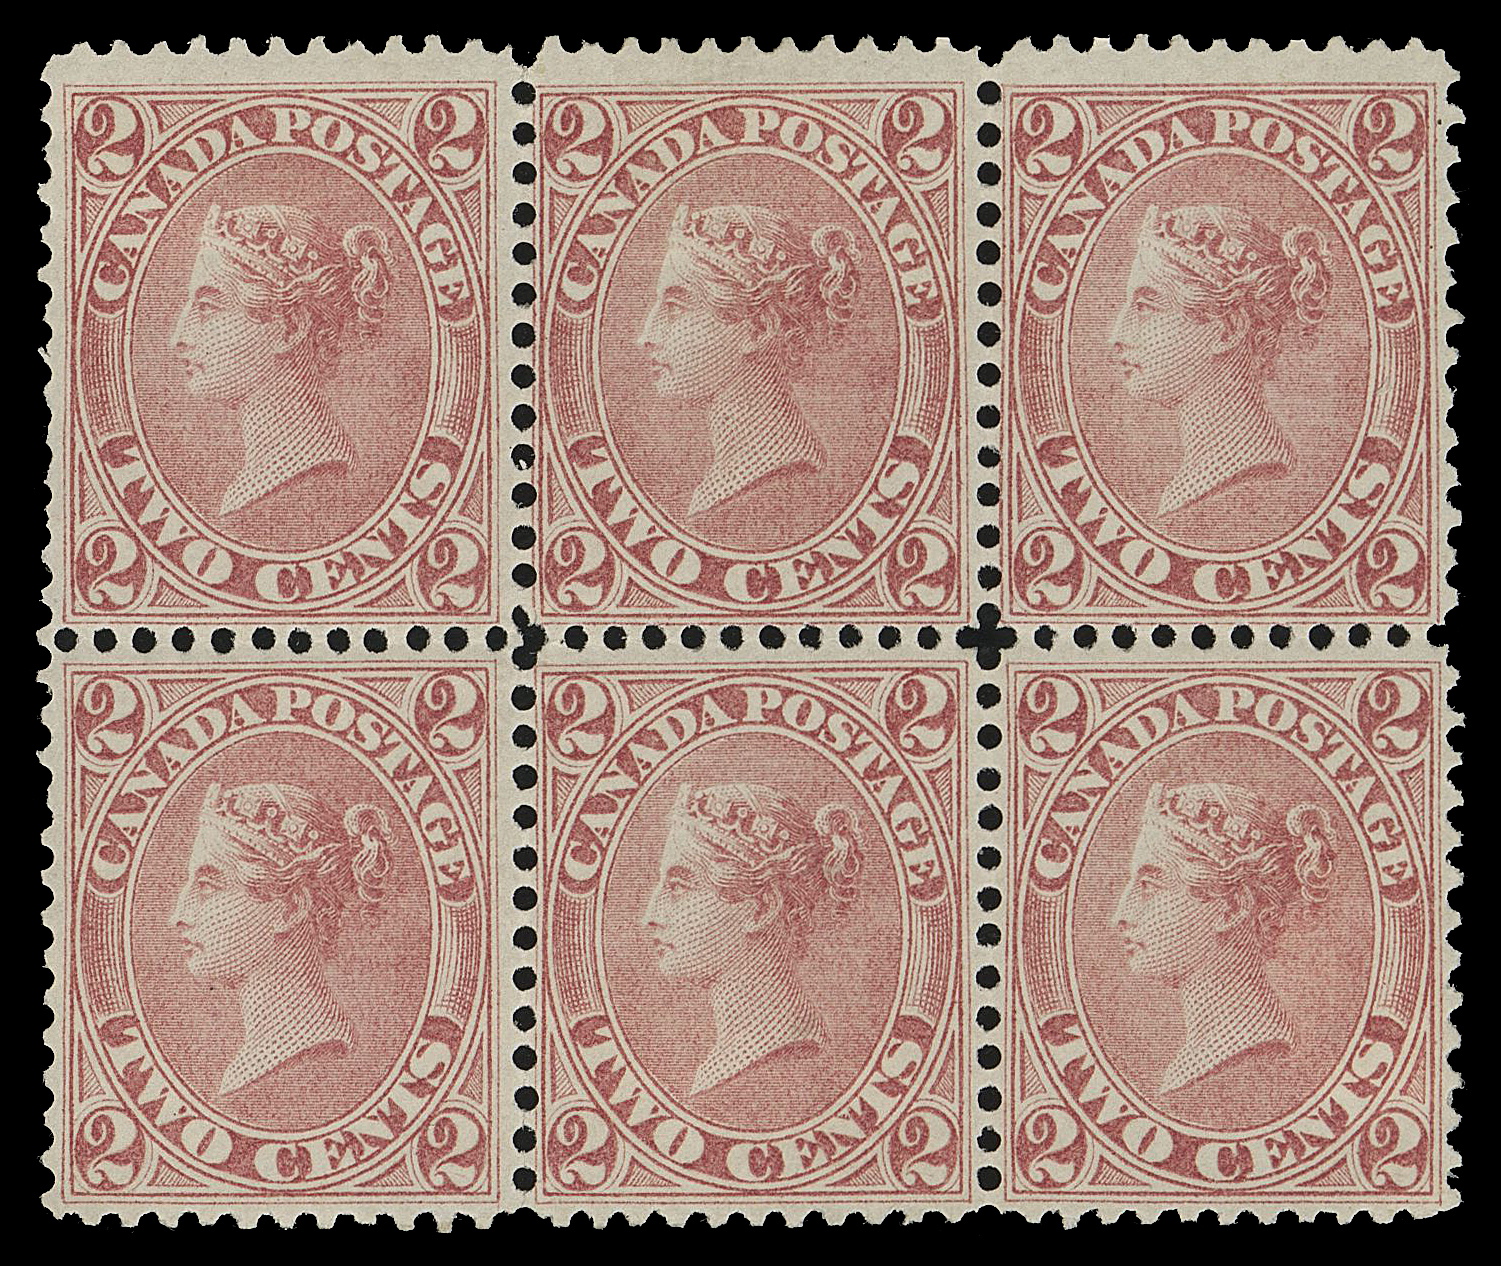 TWO CENTS  20,A superbly centered mint block of six from the First Printing  order, in remarkably choice condition with brilliant fresh colour and large part original gum, partly disturbed. One of the best  centered mint multiples that exists and also ranking among the  largest extant. A wonderful block of high caliber, VF+ OG

Provenance: Dr. Lewis L. Reford, BNA Part Two, Harmer, Rooke &  Co., October 1950; Lot 638
General Robert Gill, Robson Lowe Ltd., October 1965; Lot 117
The Ferranti British North America, Harmer, Rooke & Co., April 1968; Lot 101
British Empire sale, Robson Lowe Ltd., January 1970; Lot 62
The "Lindemann" Collection (private treaty, circa. 1997)

Diagonal line in lower right "2" variety can be seen on upper  left and right stamps.
